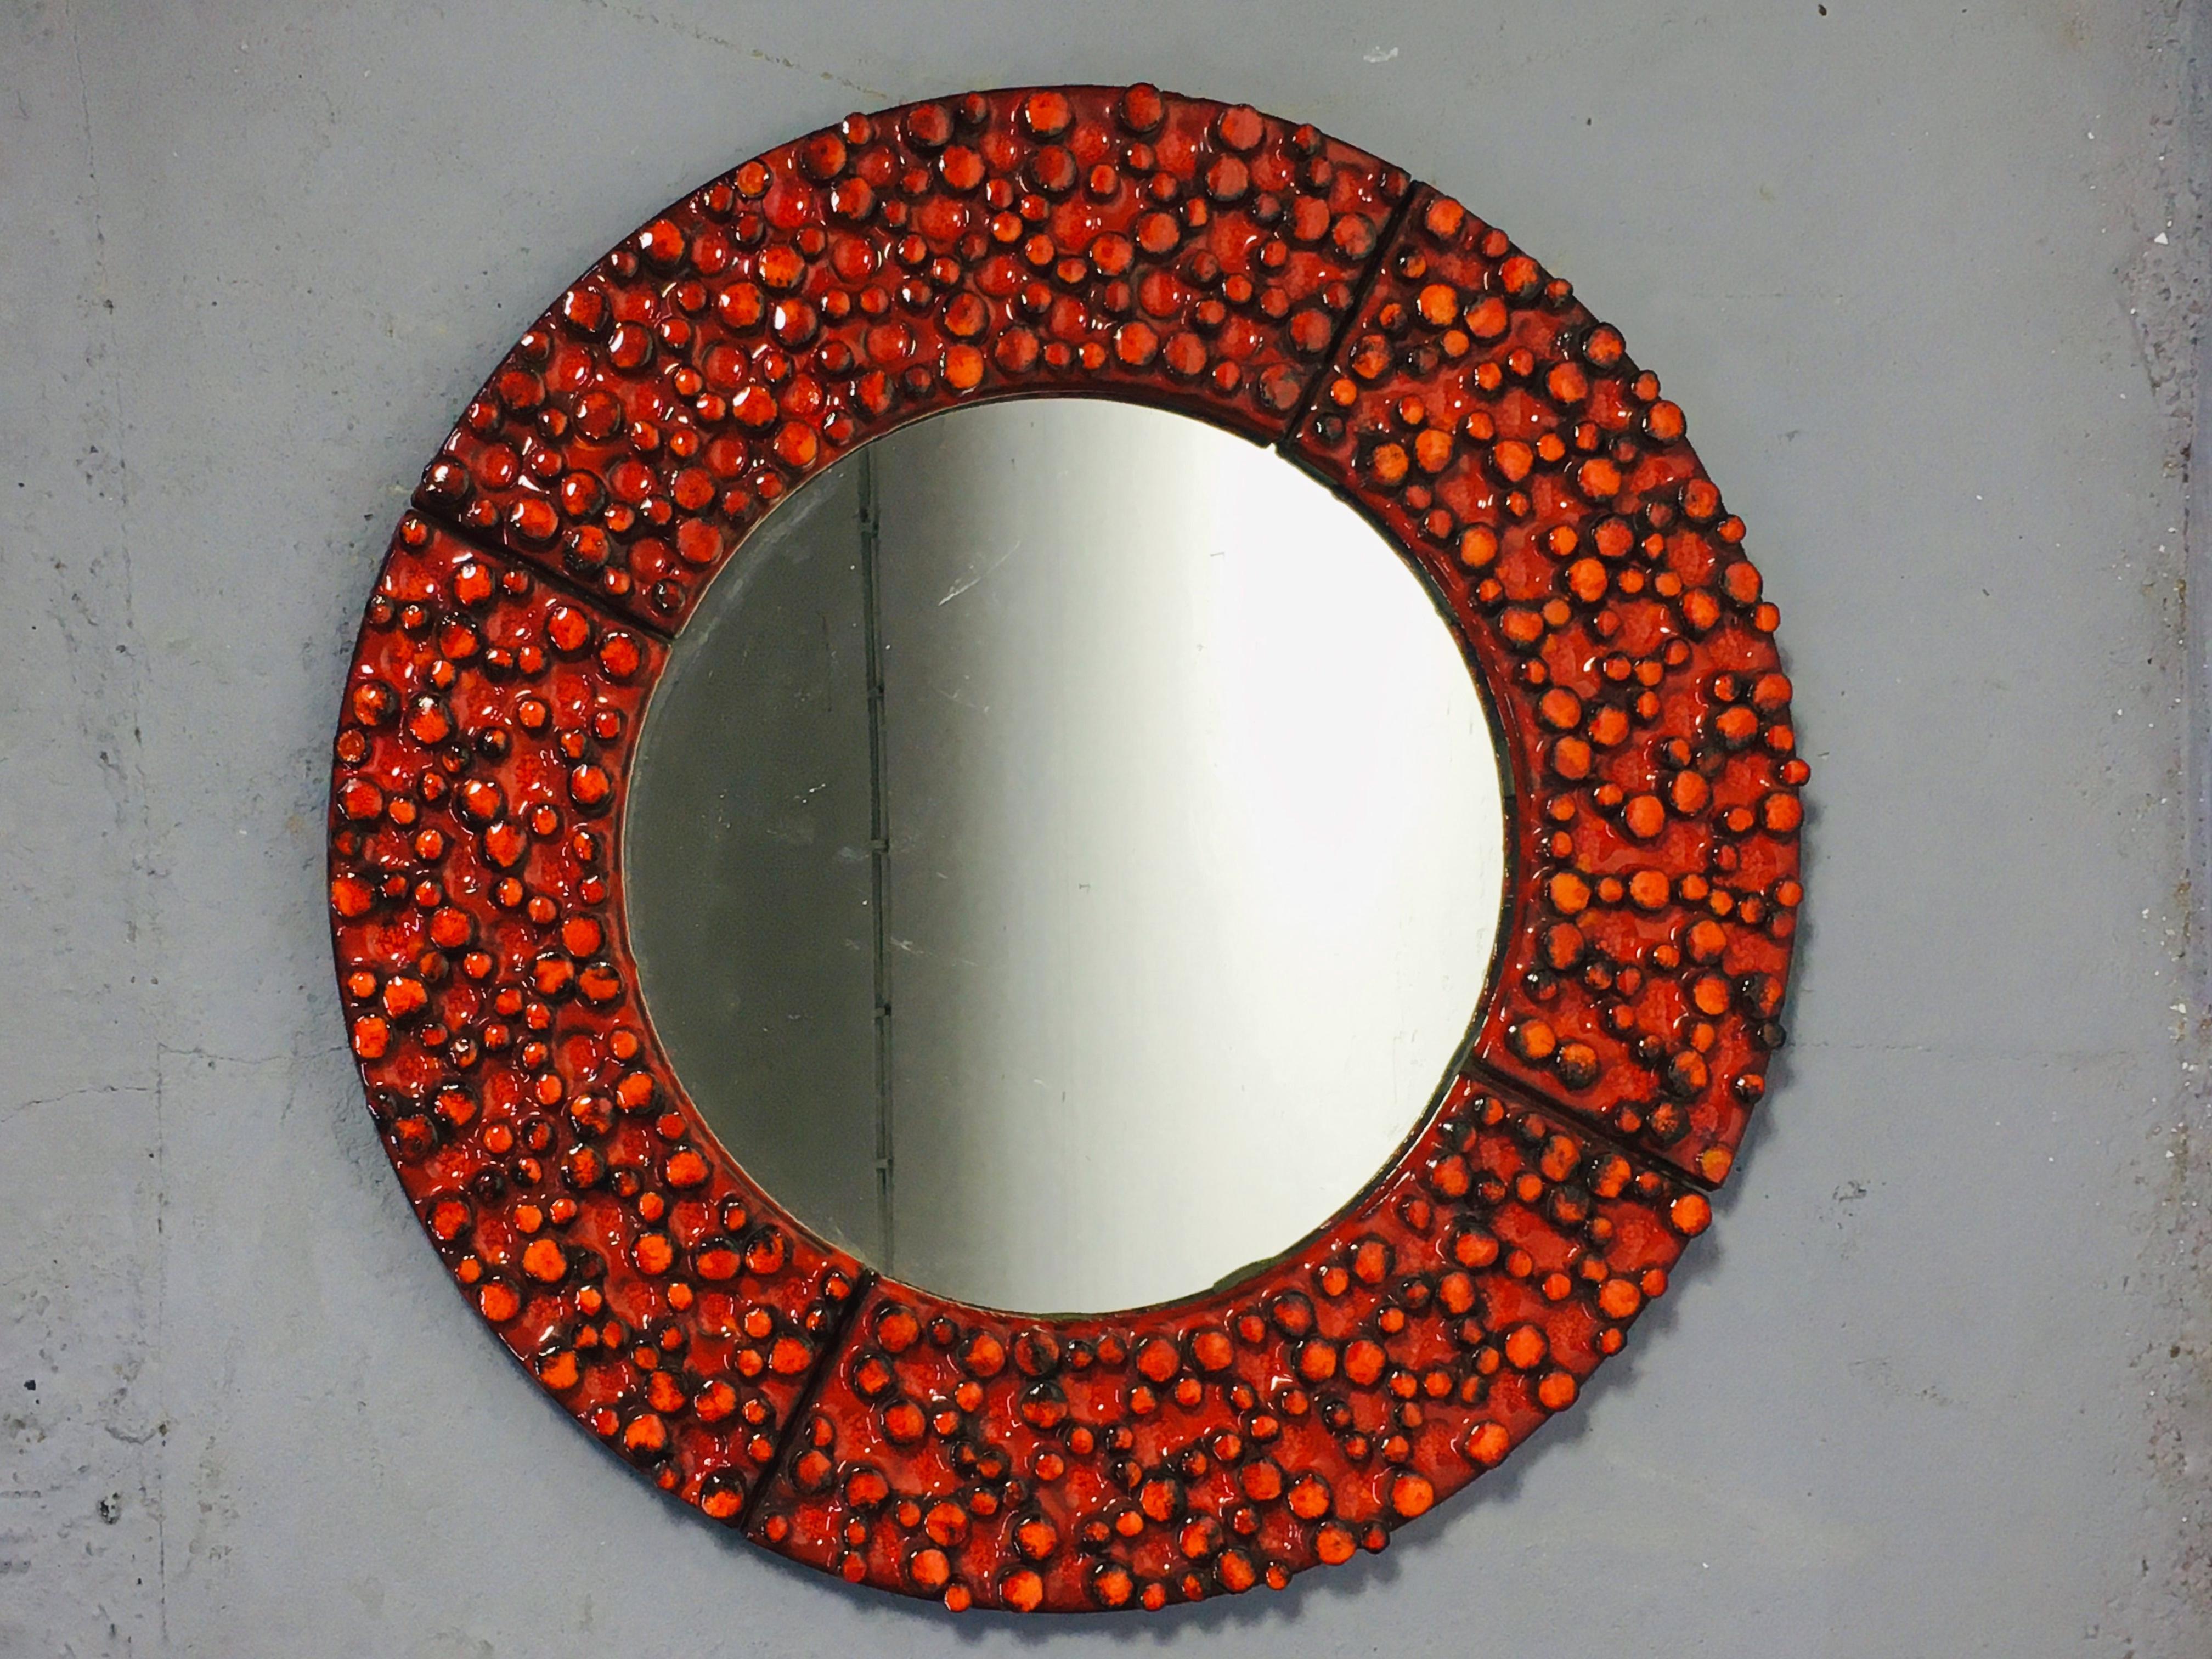 A ceramic framed mirror designed and made by Oswald Tieberghien, one of Belgium's most famous ceramist. Very rare piece of his work. Its large, red-glazed, relief surface is perfect for both modern and vintage interiors. Available in perfect